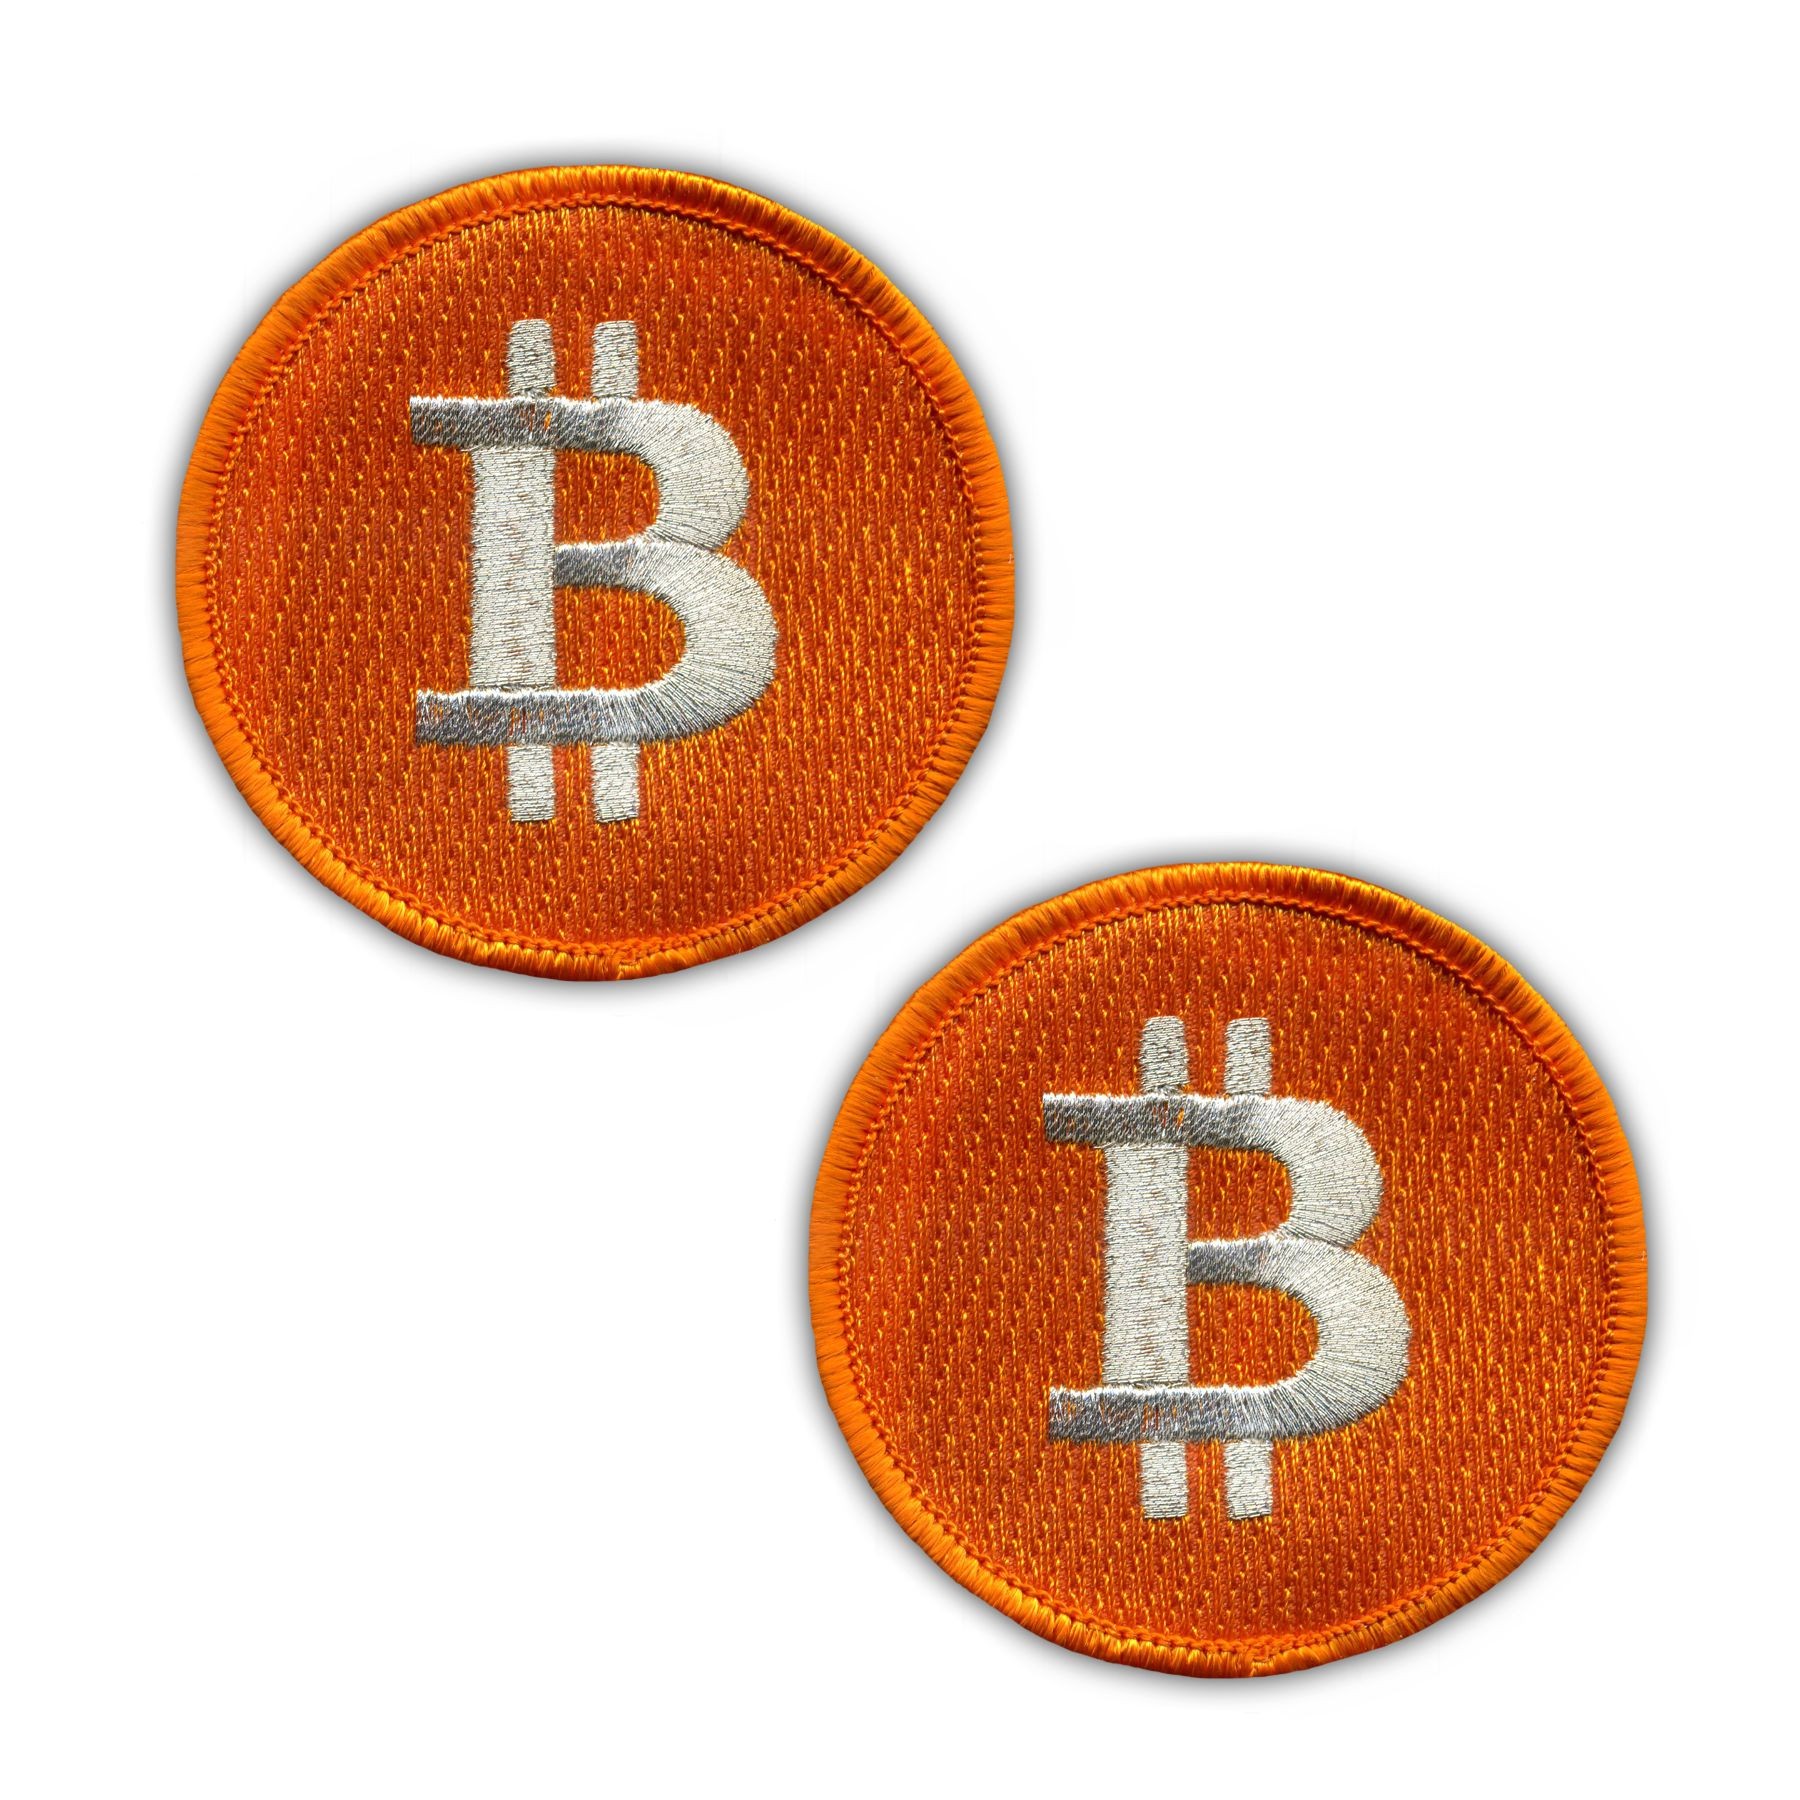 bitcoin patch